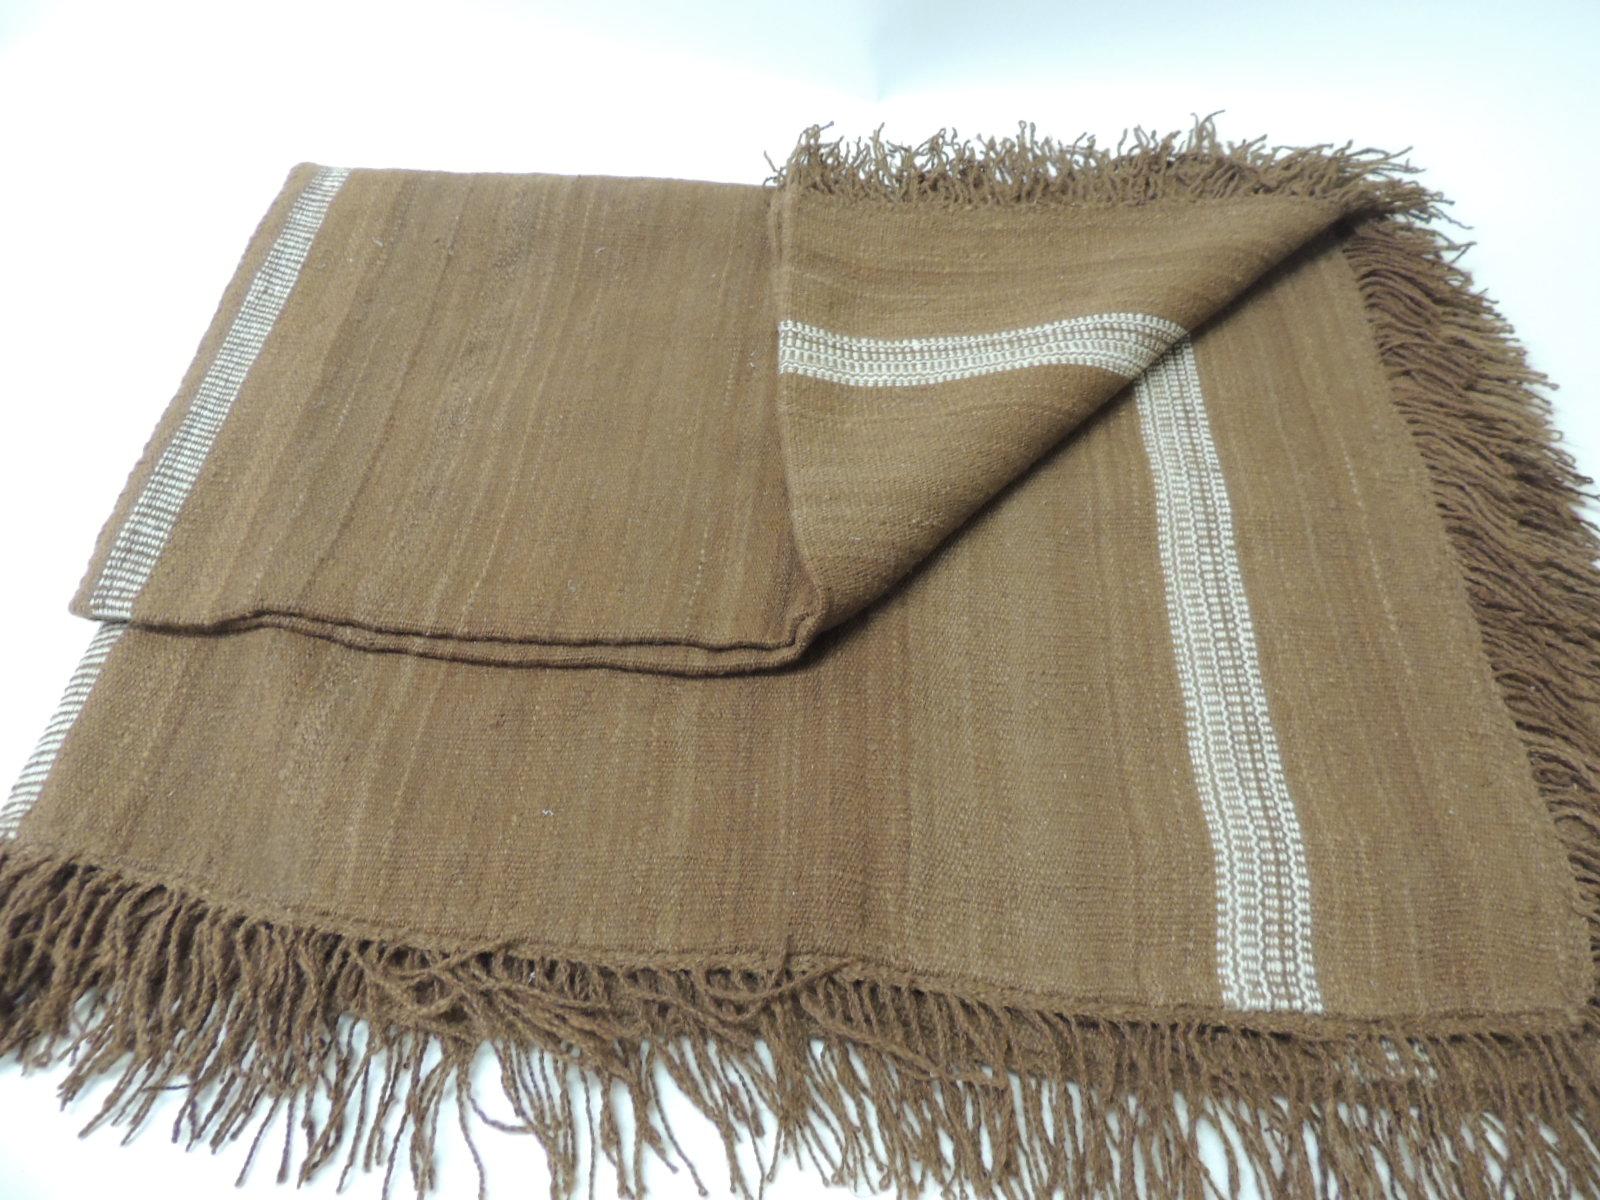 Argentine Large Vintage Brown and White Woven Wool Throw with Hand-Knotted Fringes